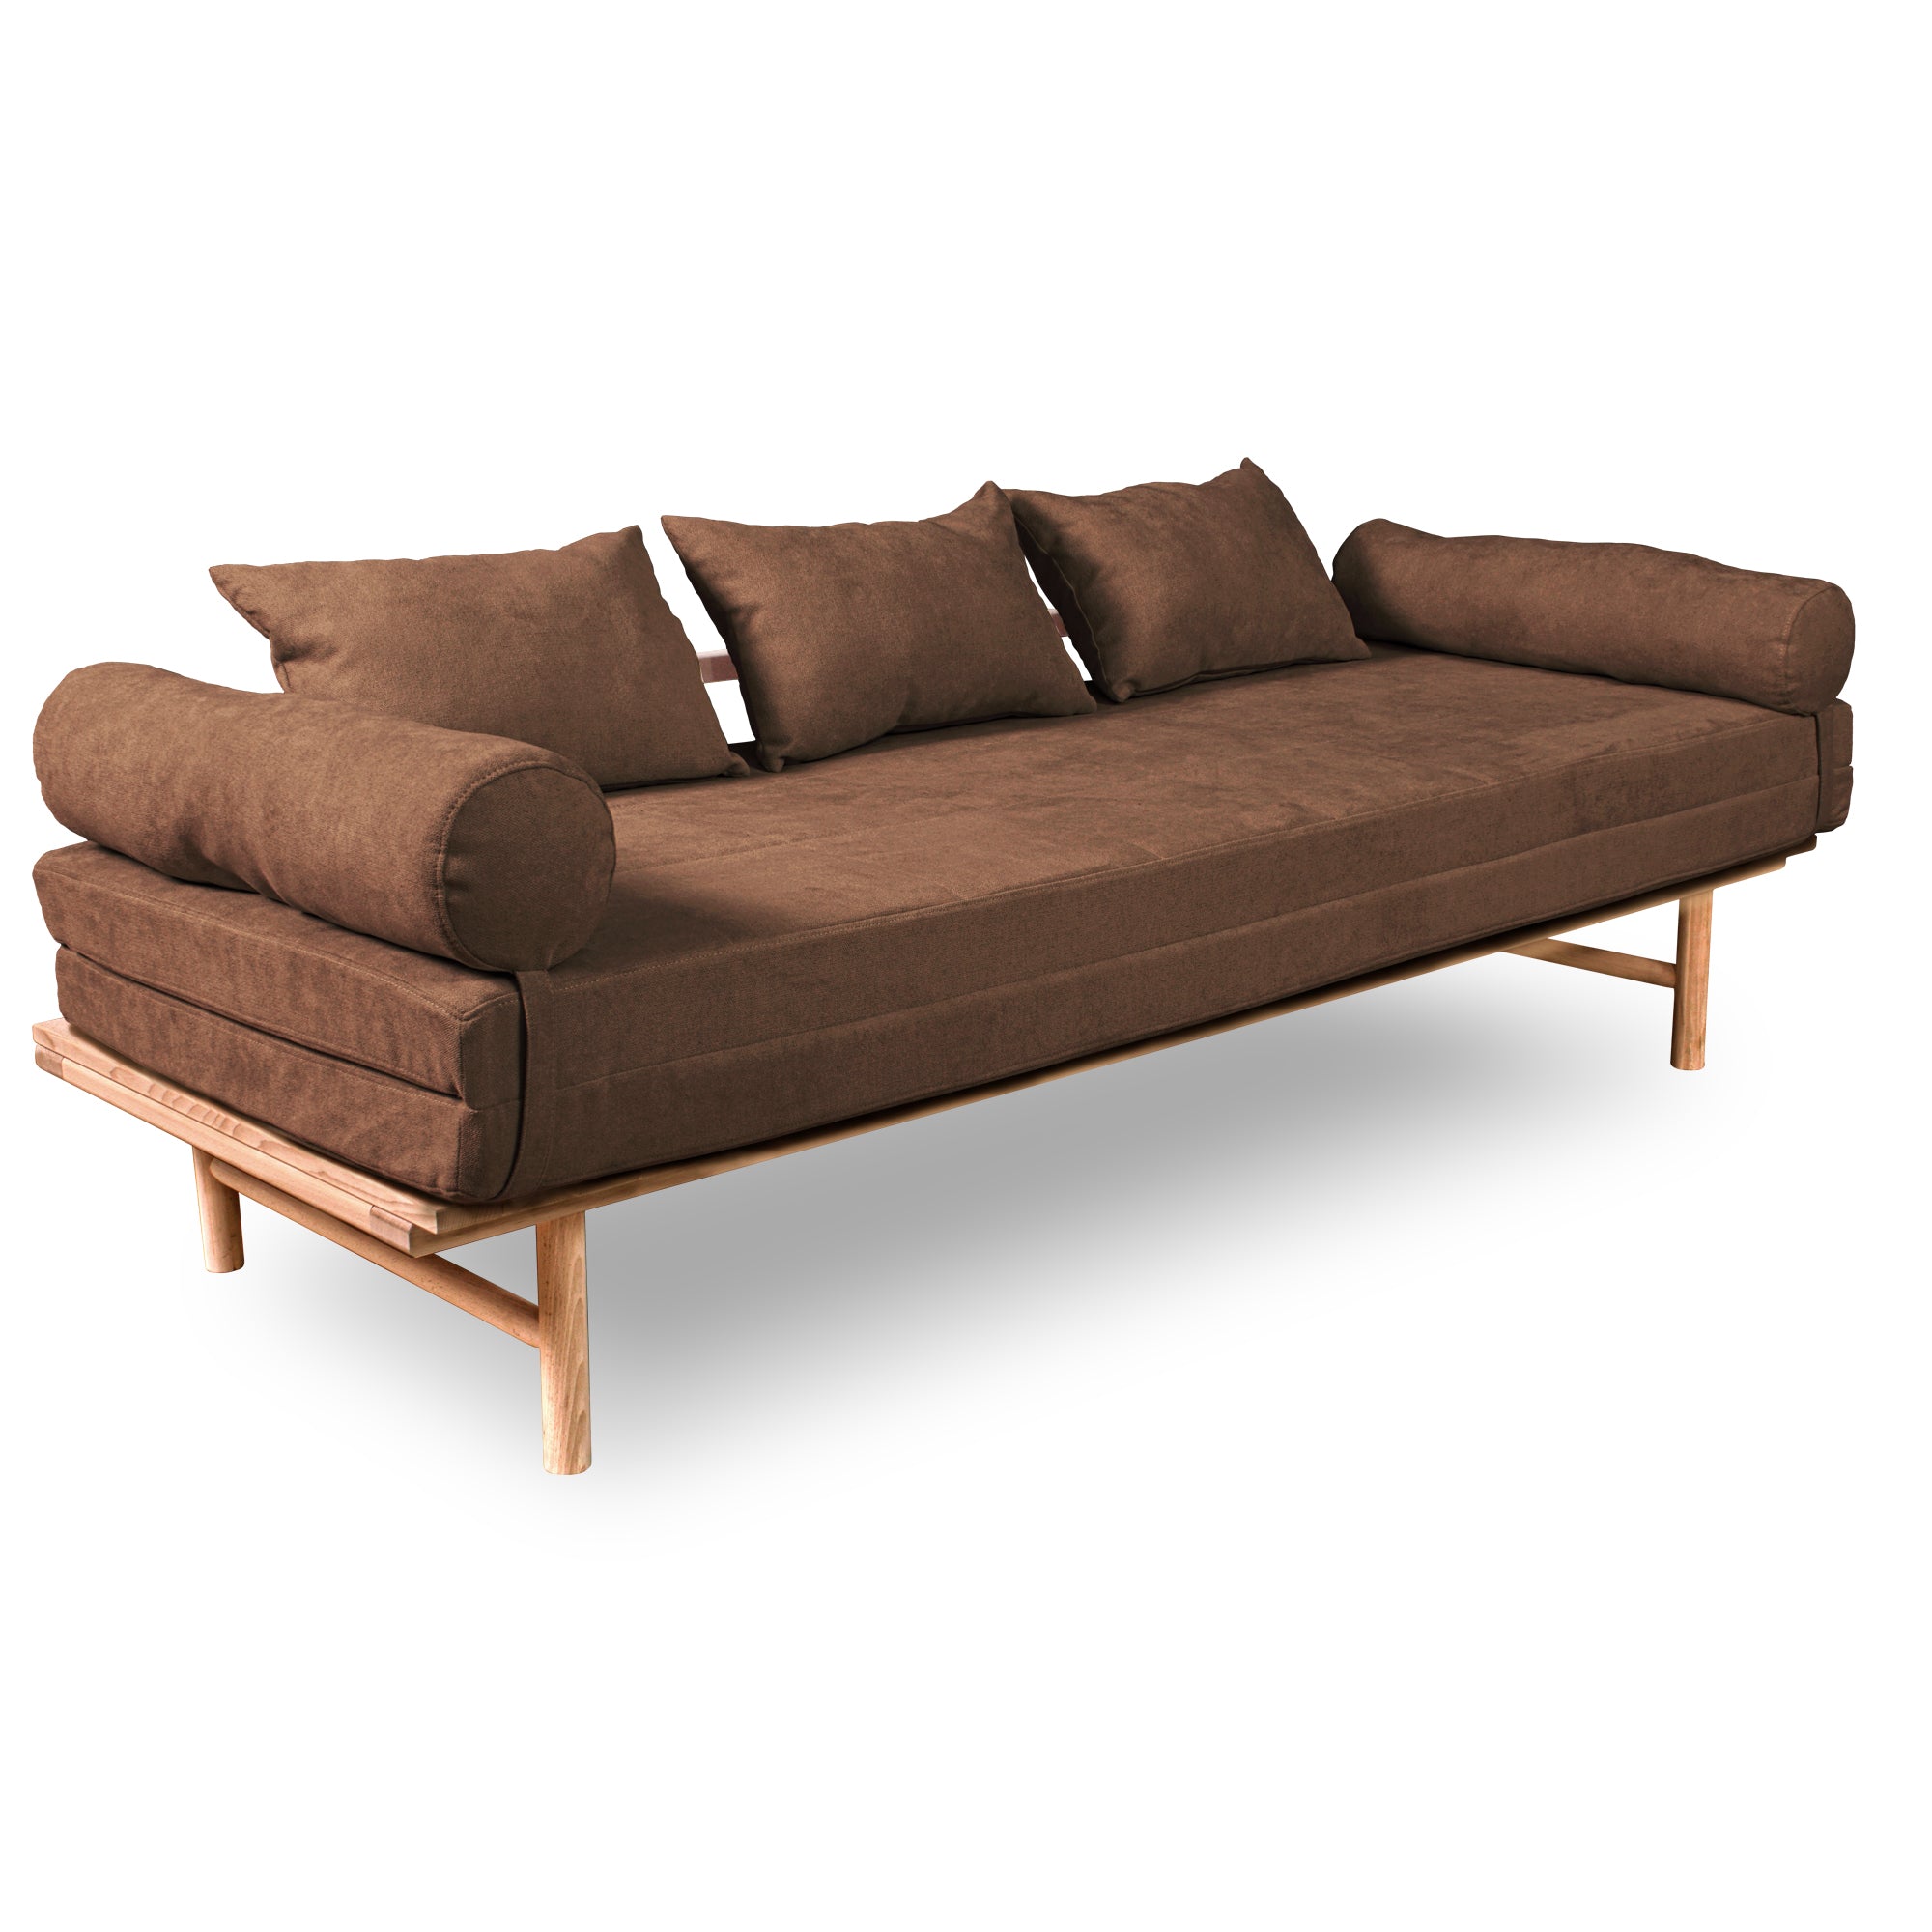 Le MAR Folding Daybed, Beech Wood Frame, Natural Colour-upholstery brown